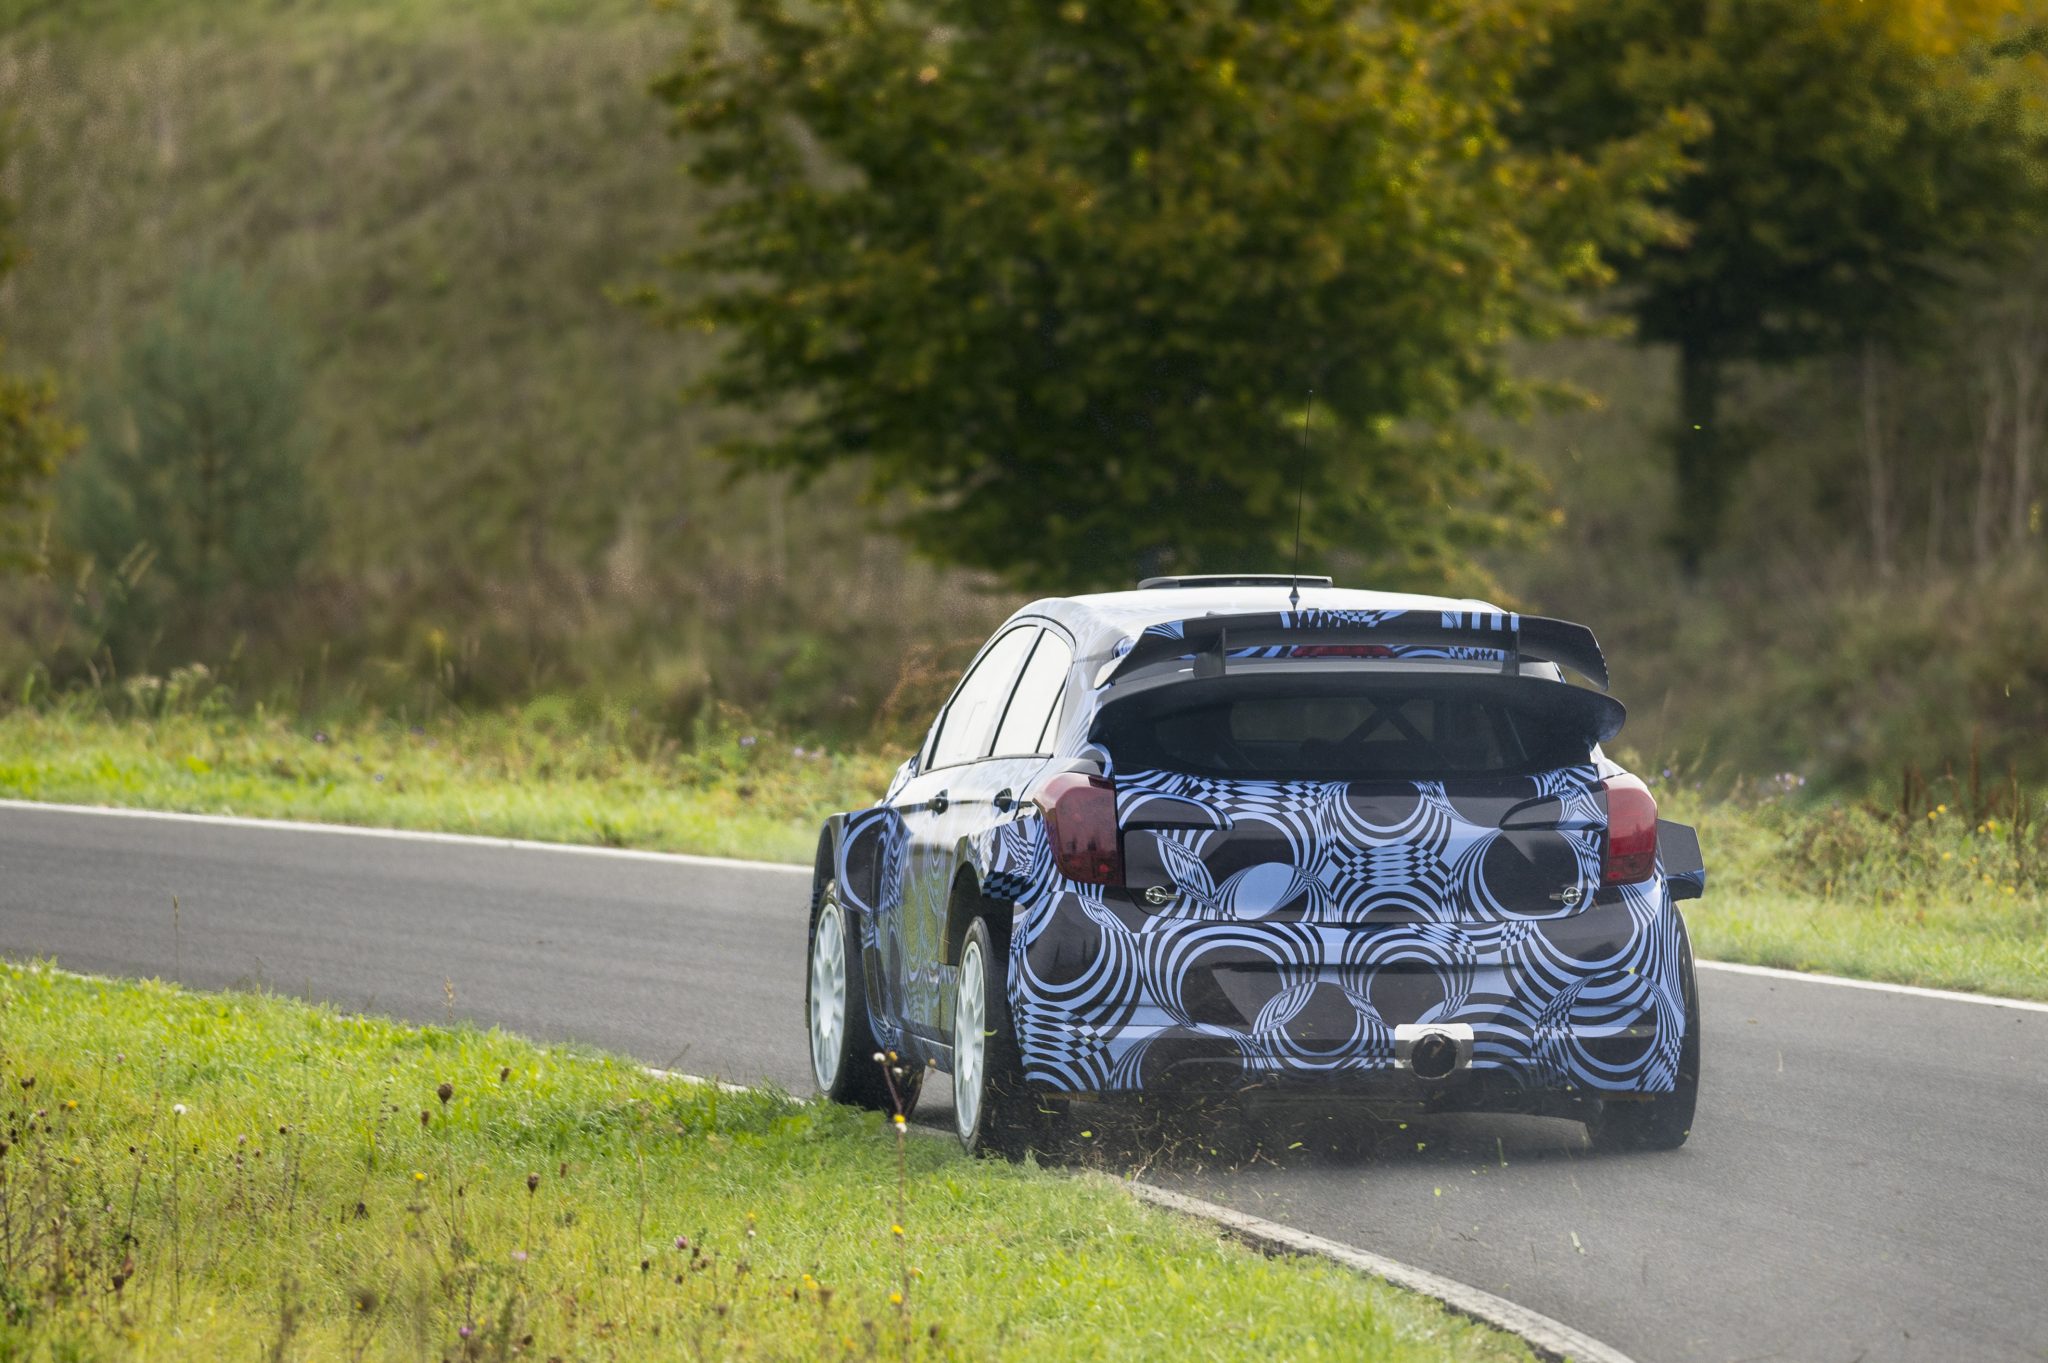 New Generation i20 WRC Prototype - Roll out